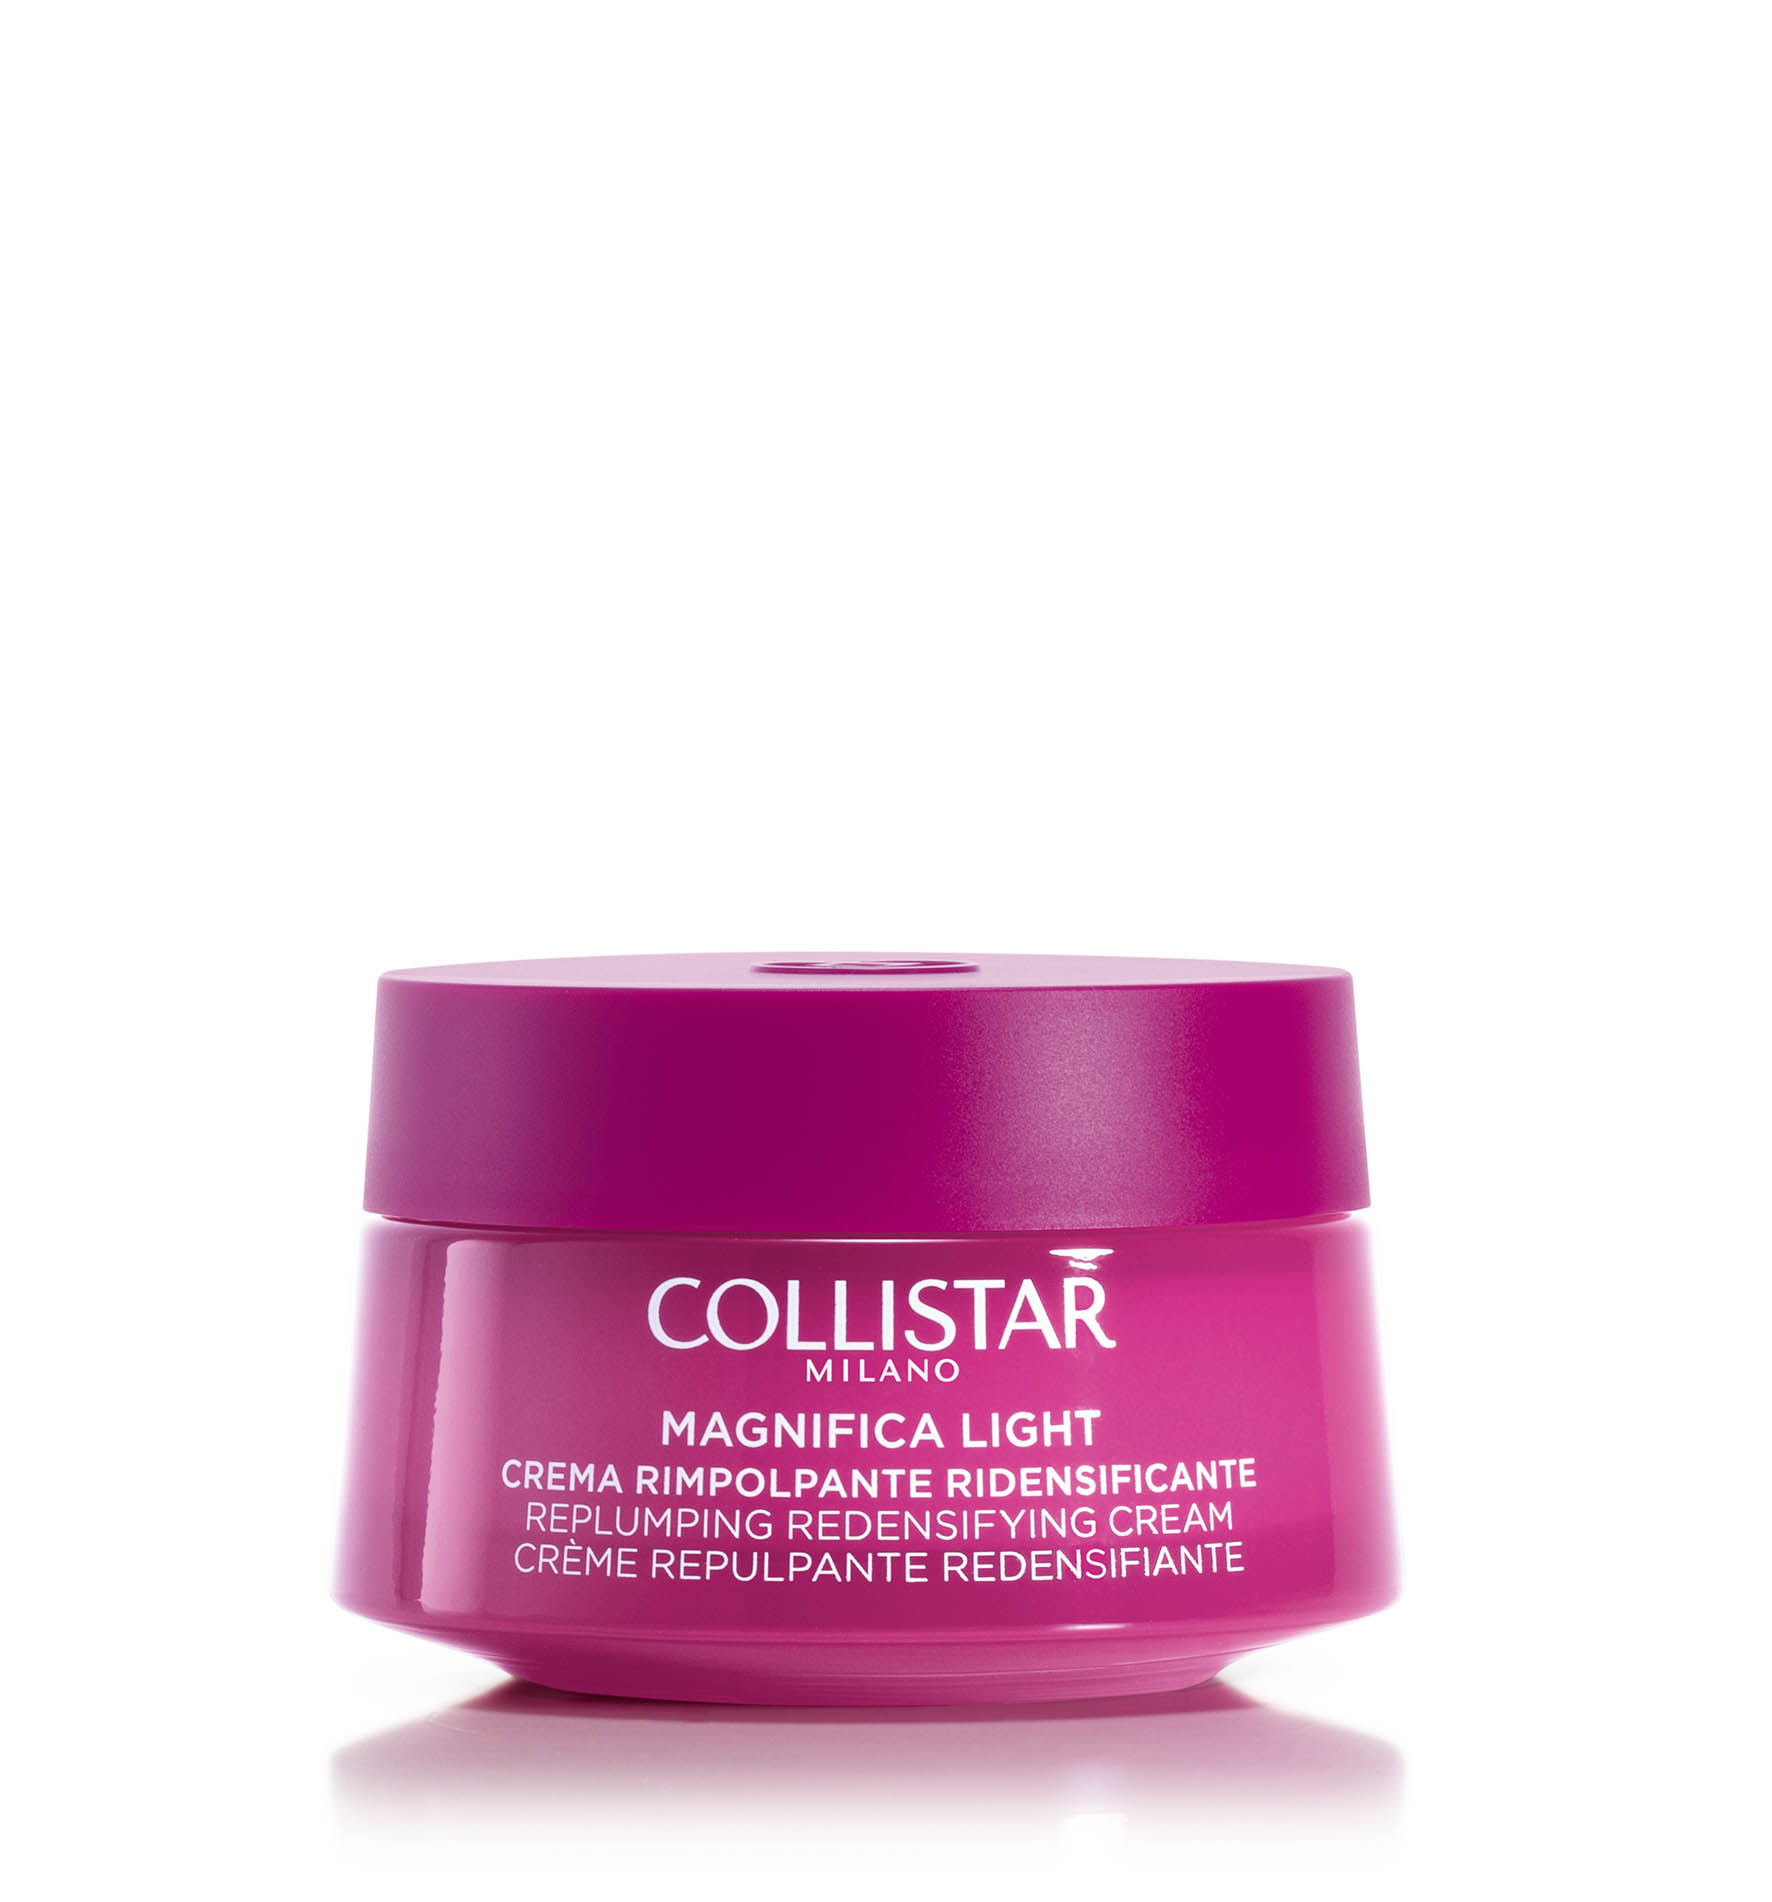 MAGNIFICA LIGHT REPLUMPING REDENSIFYING CREAM FACE AND NECK - Anti-age | Collistar - Shop Online Ufficiale